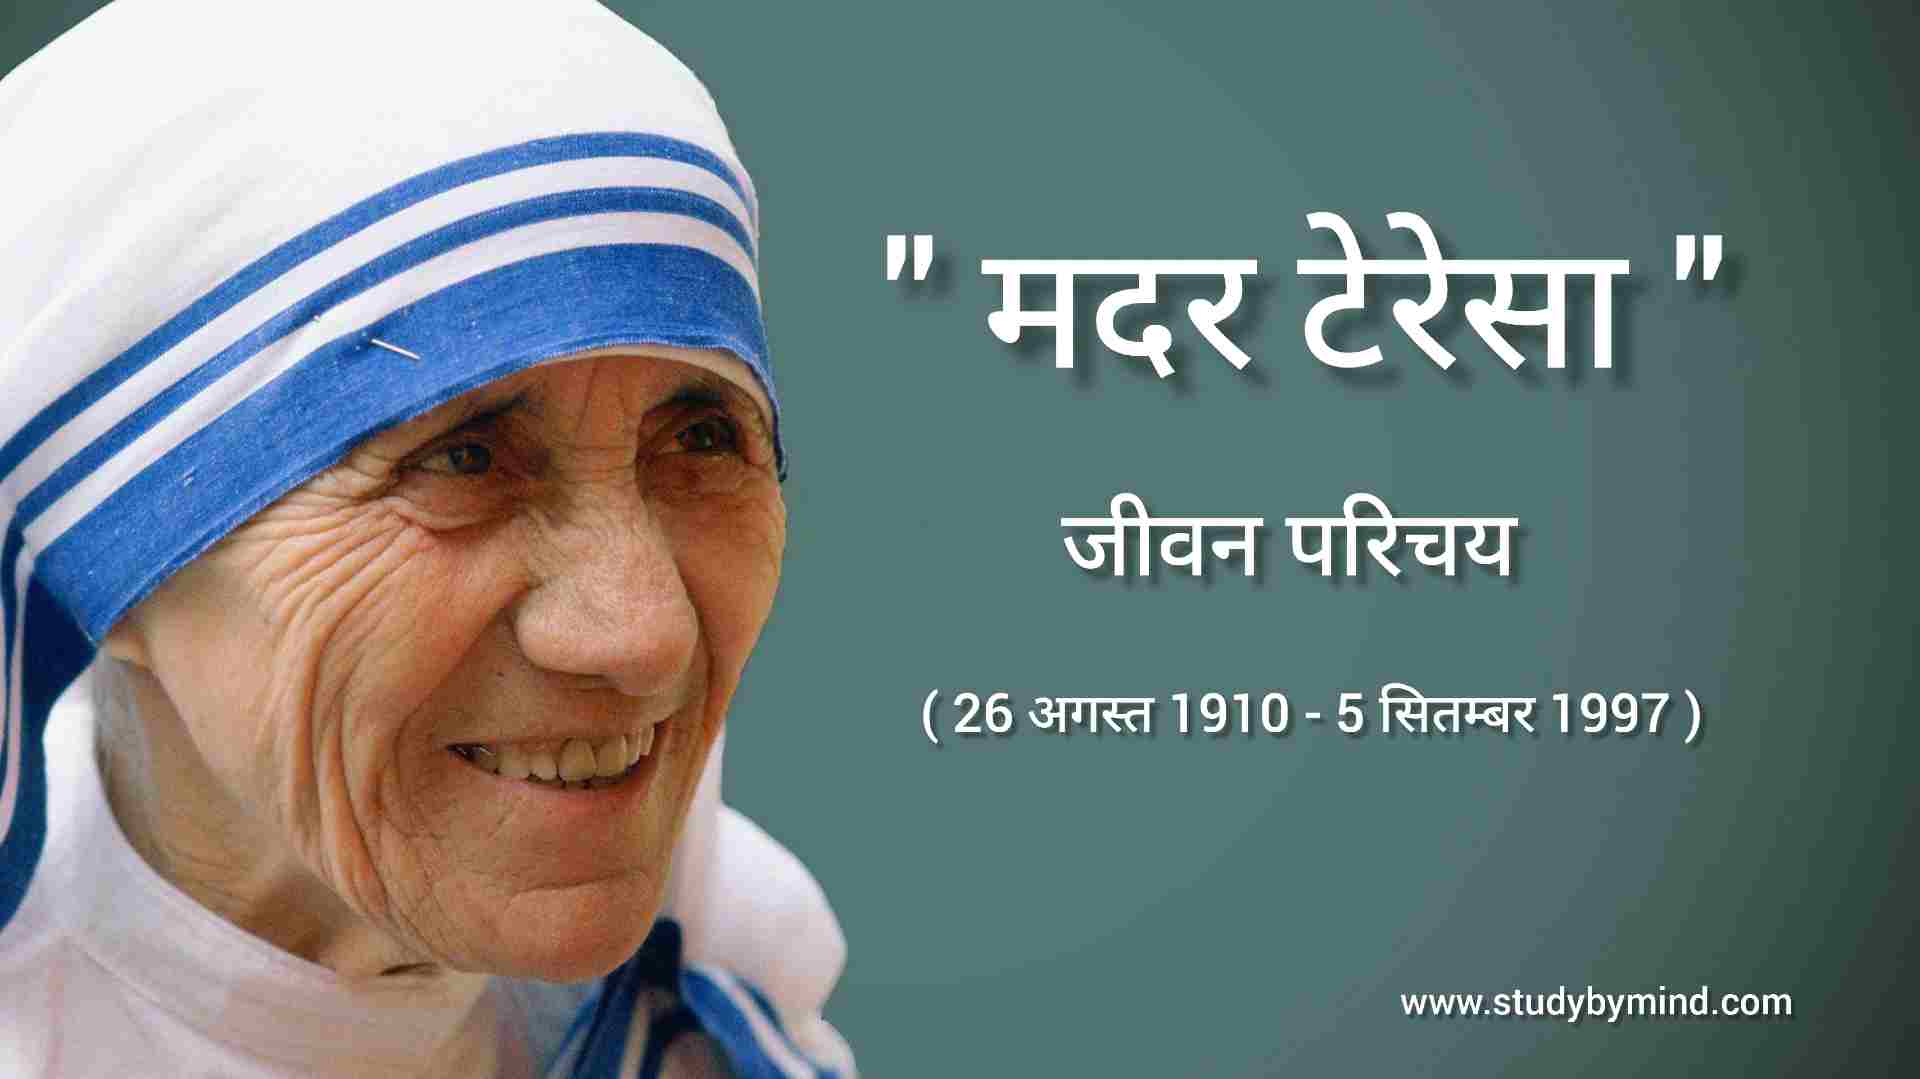 You are currently viewing मदर टेरेसा जीवन परिचय mother Teresa biography in hindi